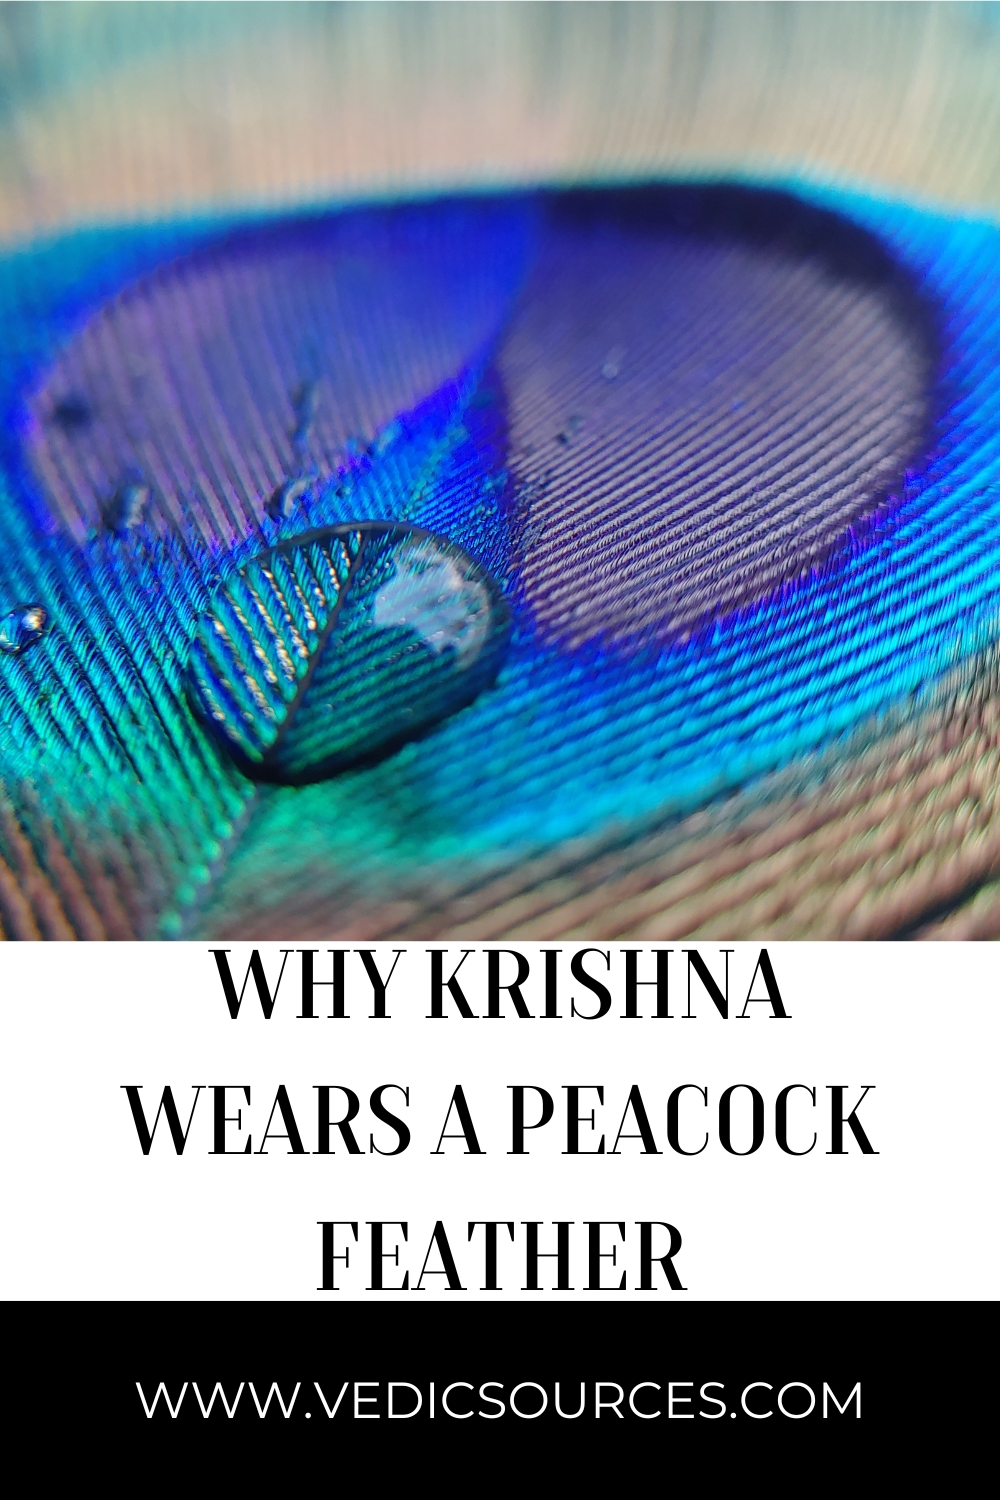 Why Krishna Wears Peacock Feather